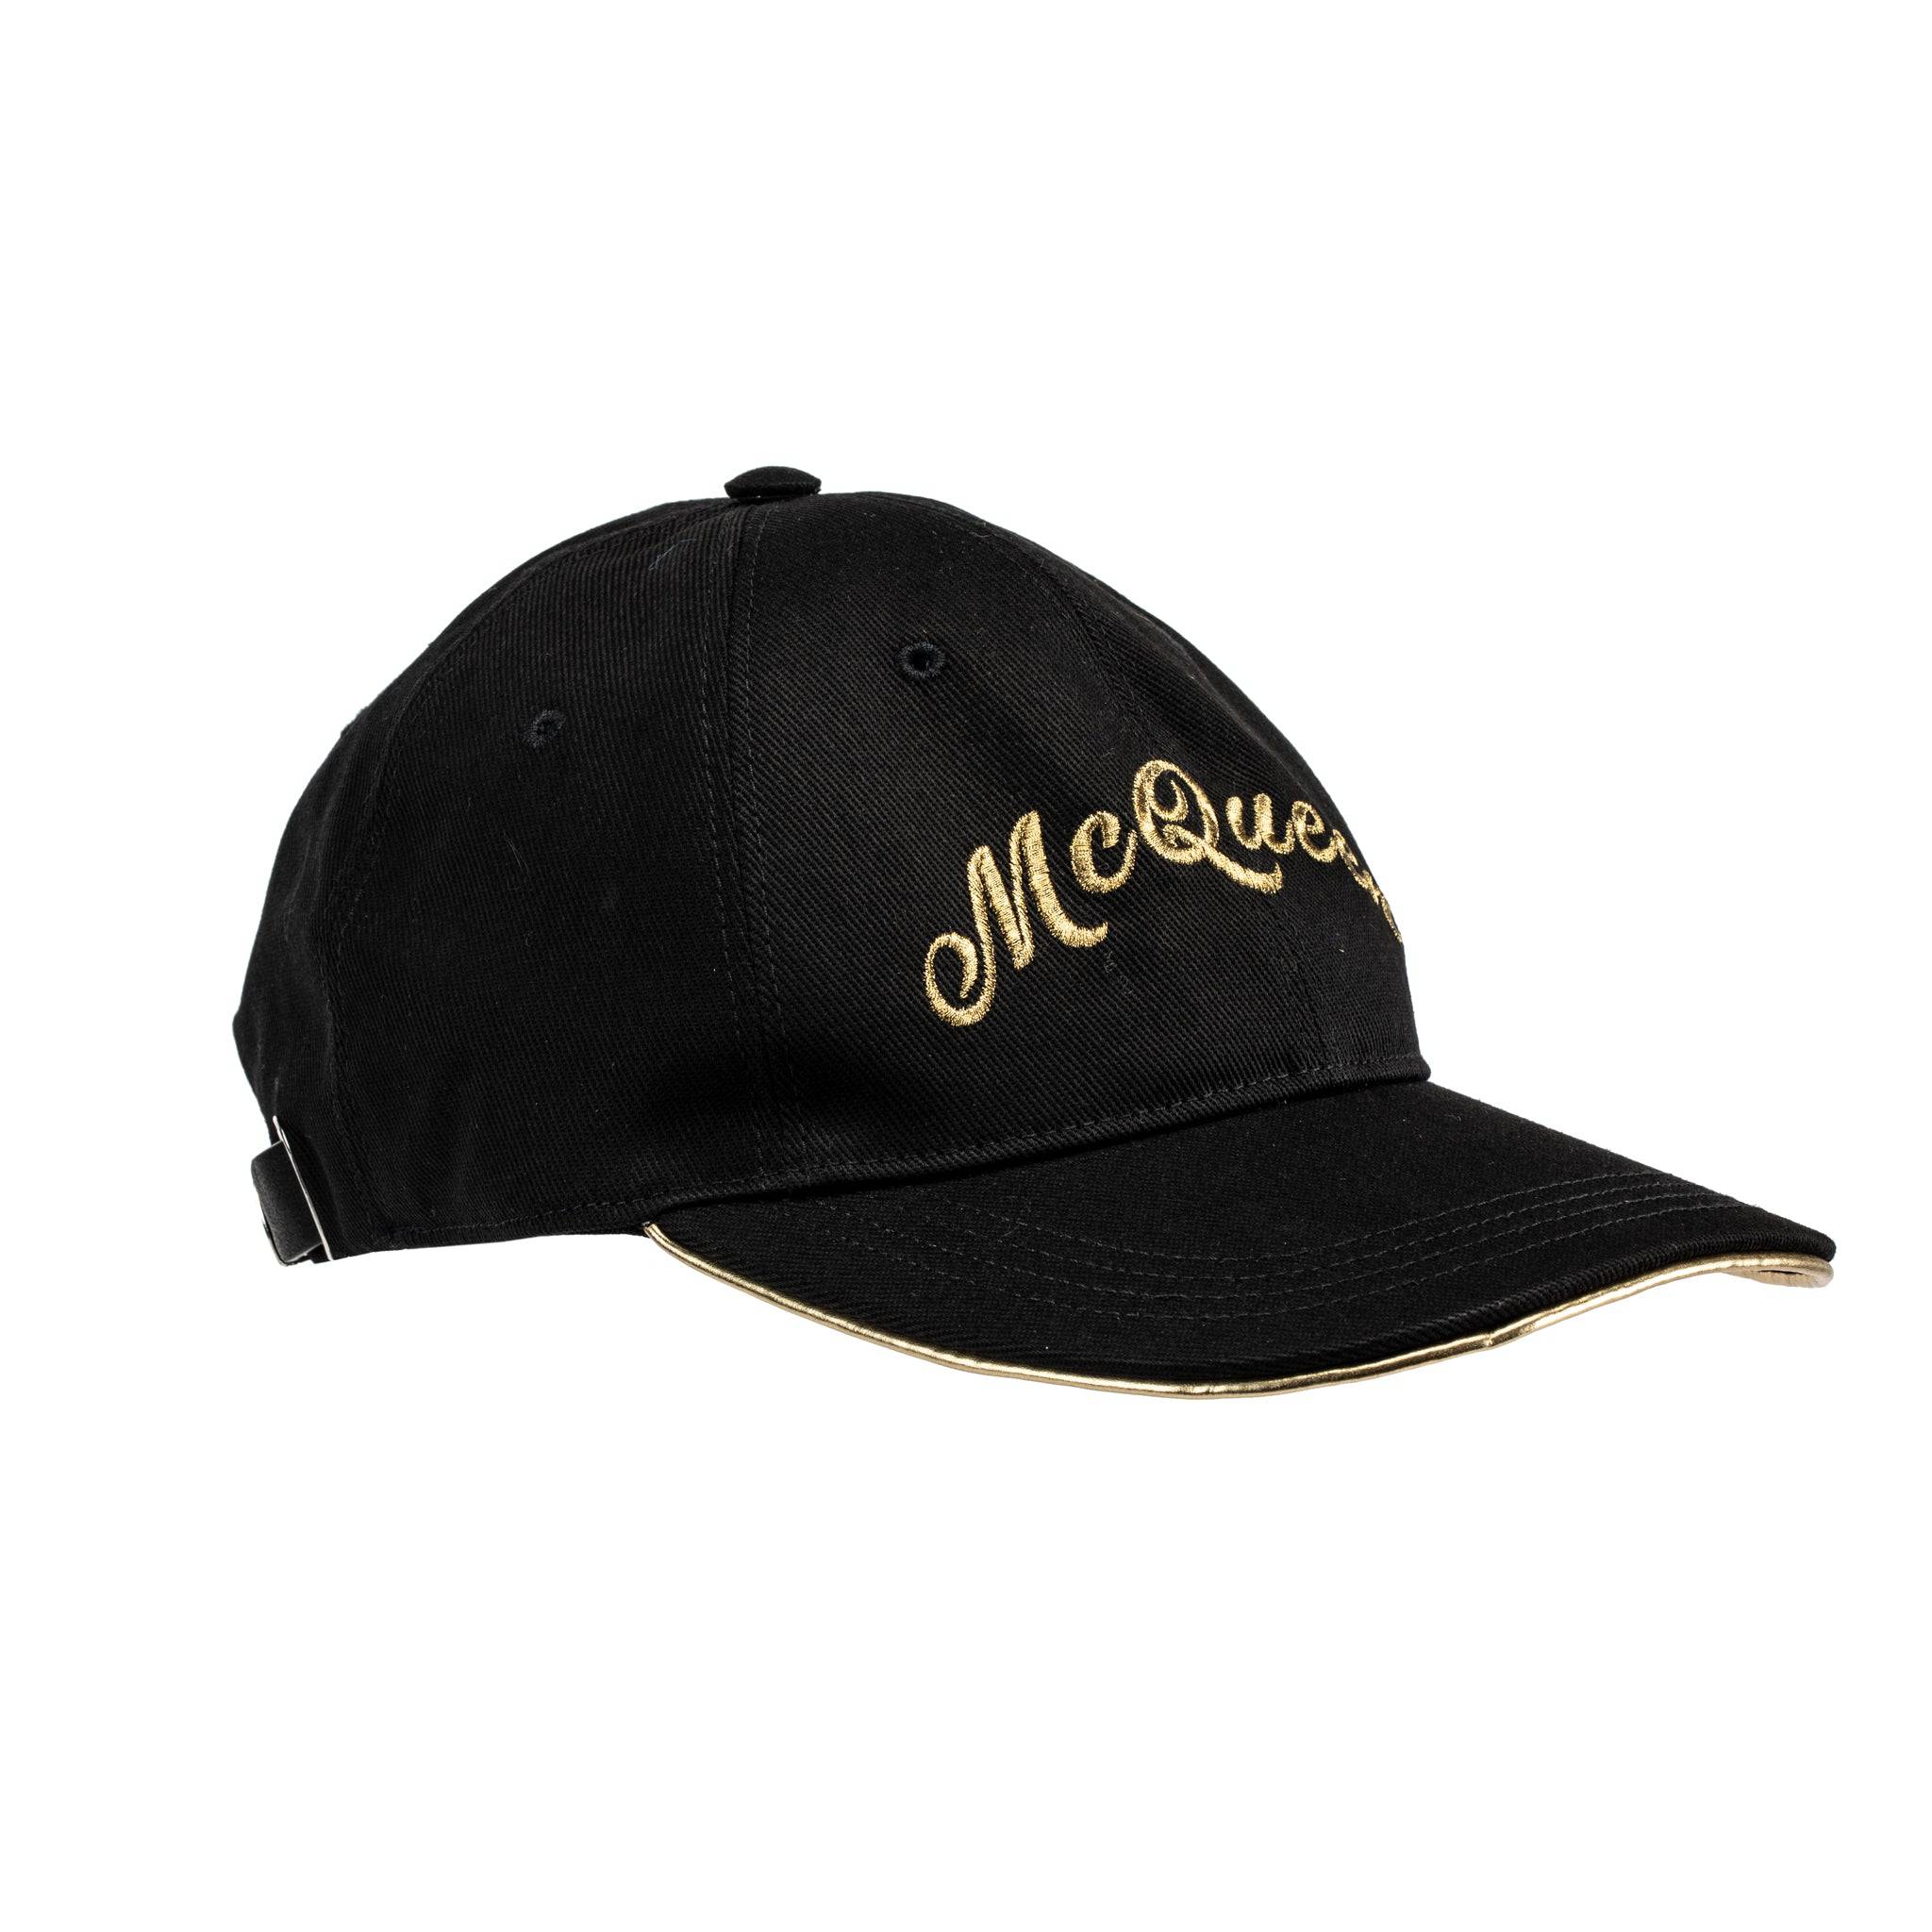 ALEXANDER MCQUEEN EMBROIDERED CAP BLACK AND GOLD - On Repeat